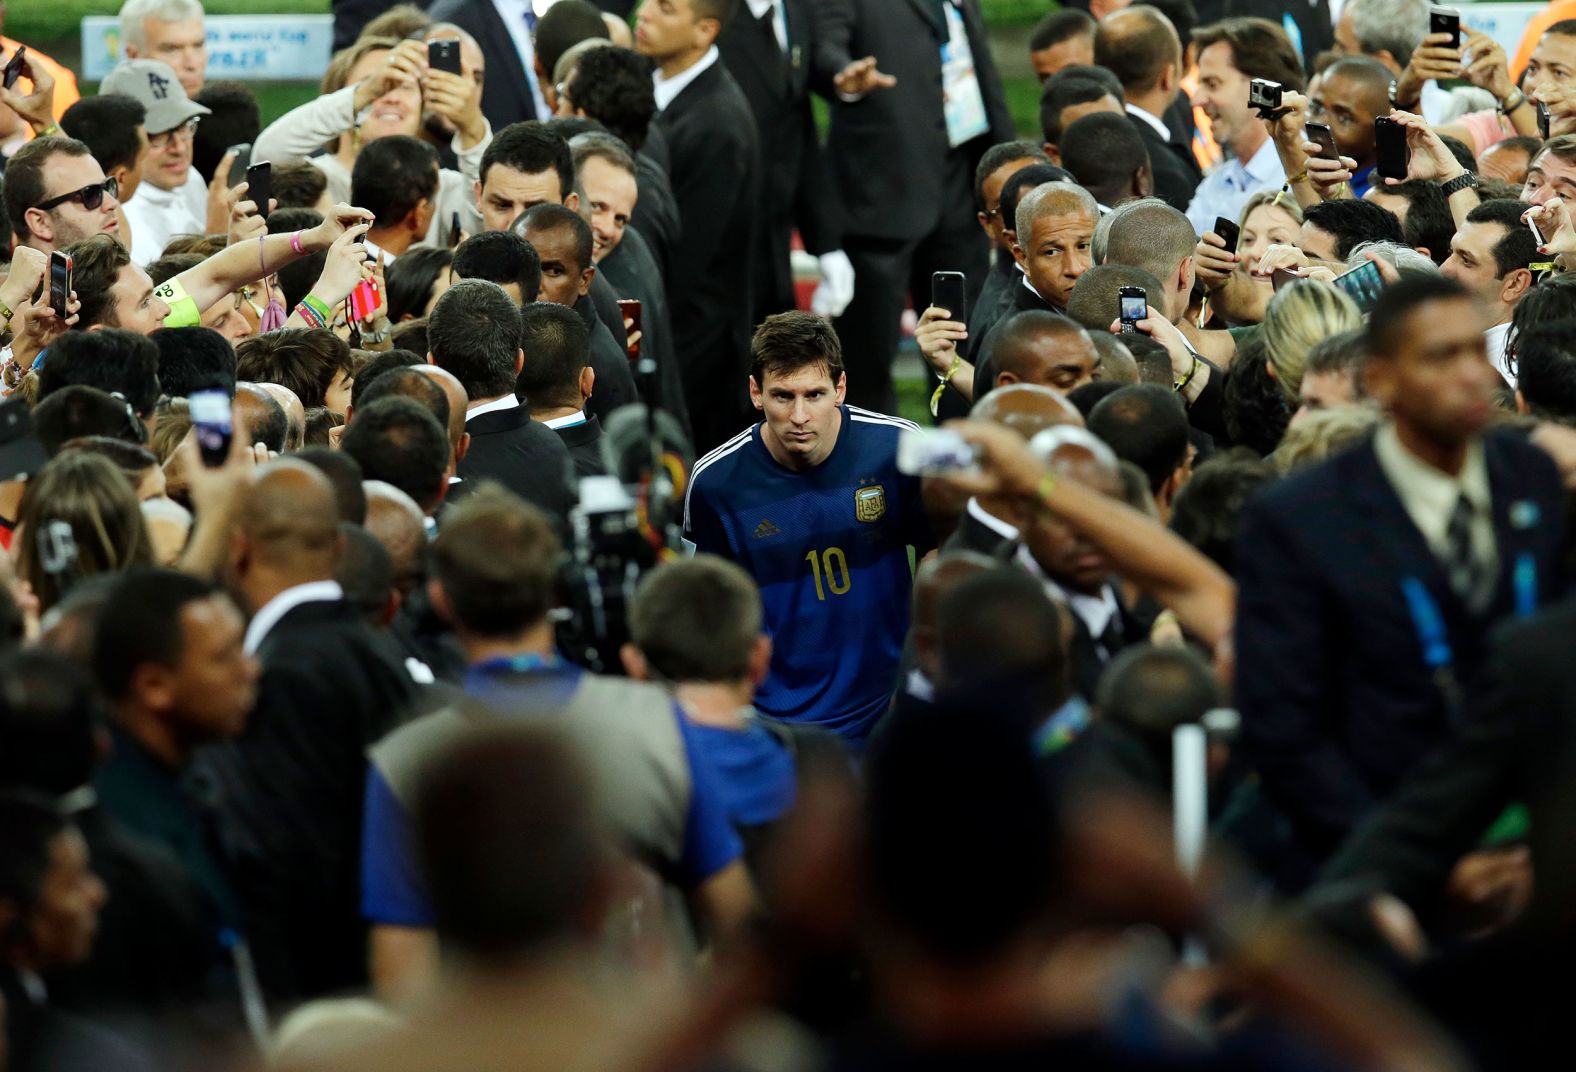 Messi walks with Argentina teammates after losing the World Cup final to Germany in July 2014. Messi won the Golden Ball award that is given to the tournament's top player.